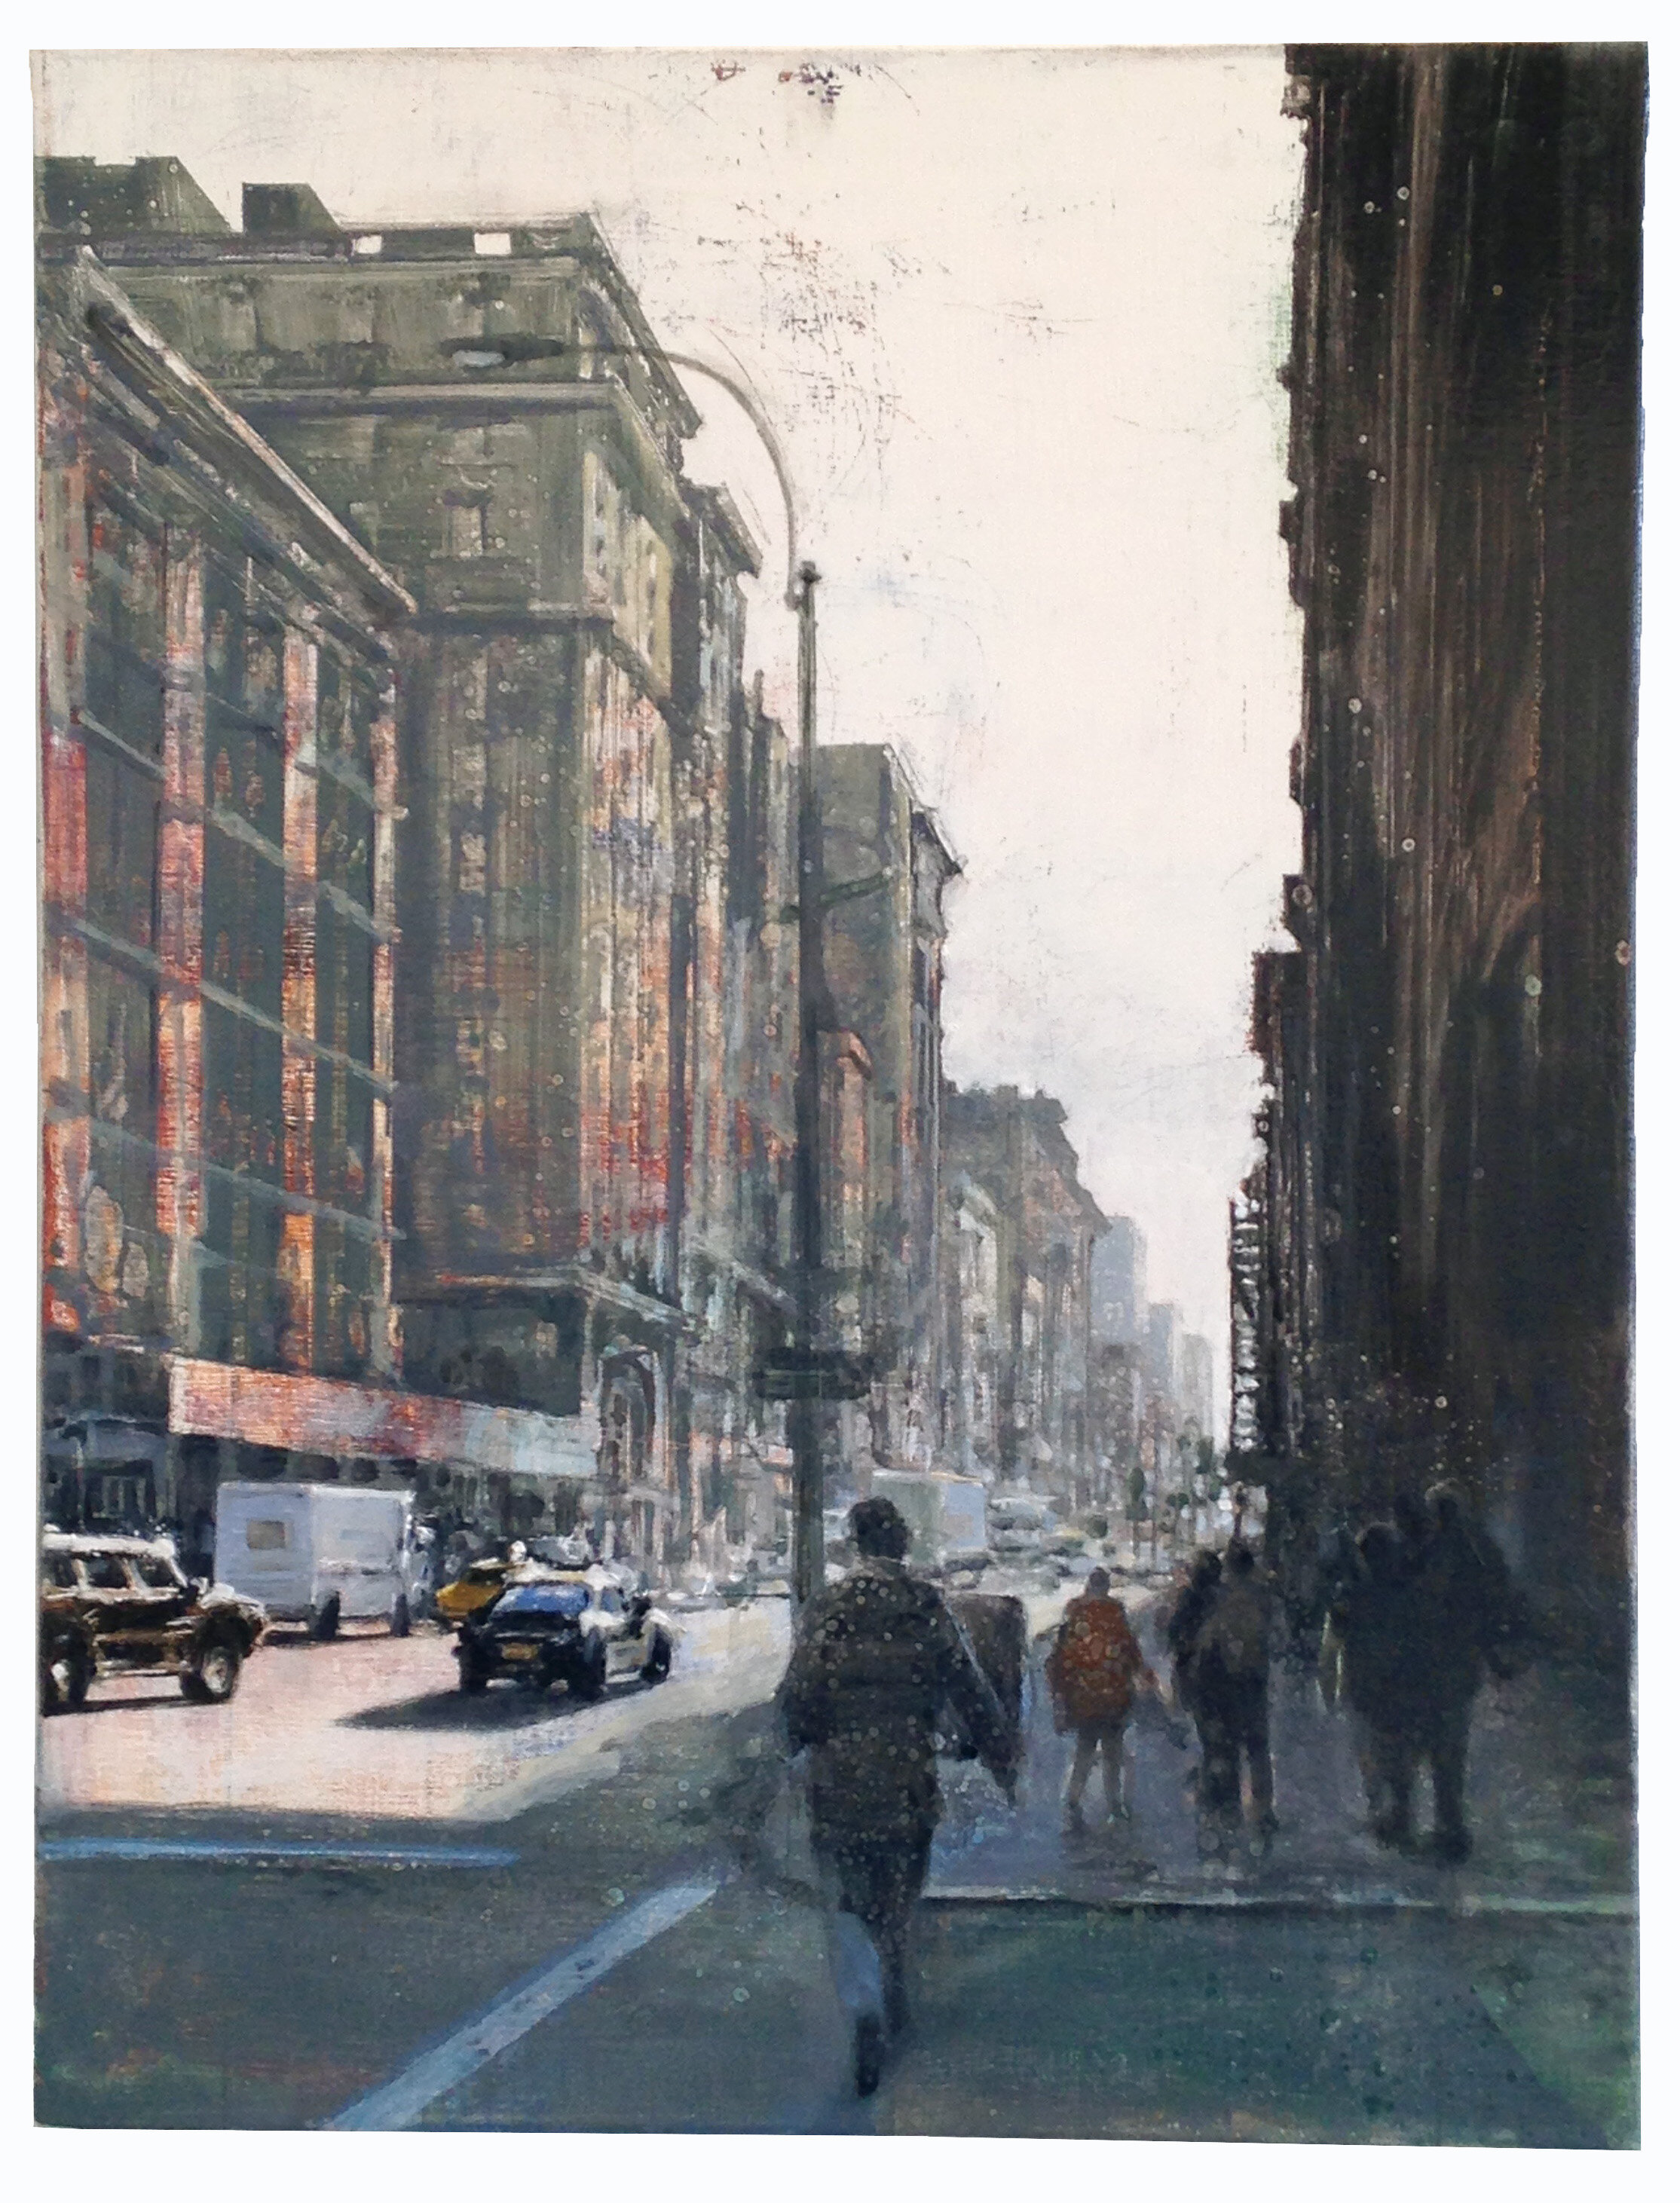  Lower Broadway 23.5 x 18 inches  (60x46cm) Oil on linen 2016 